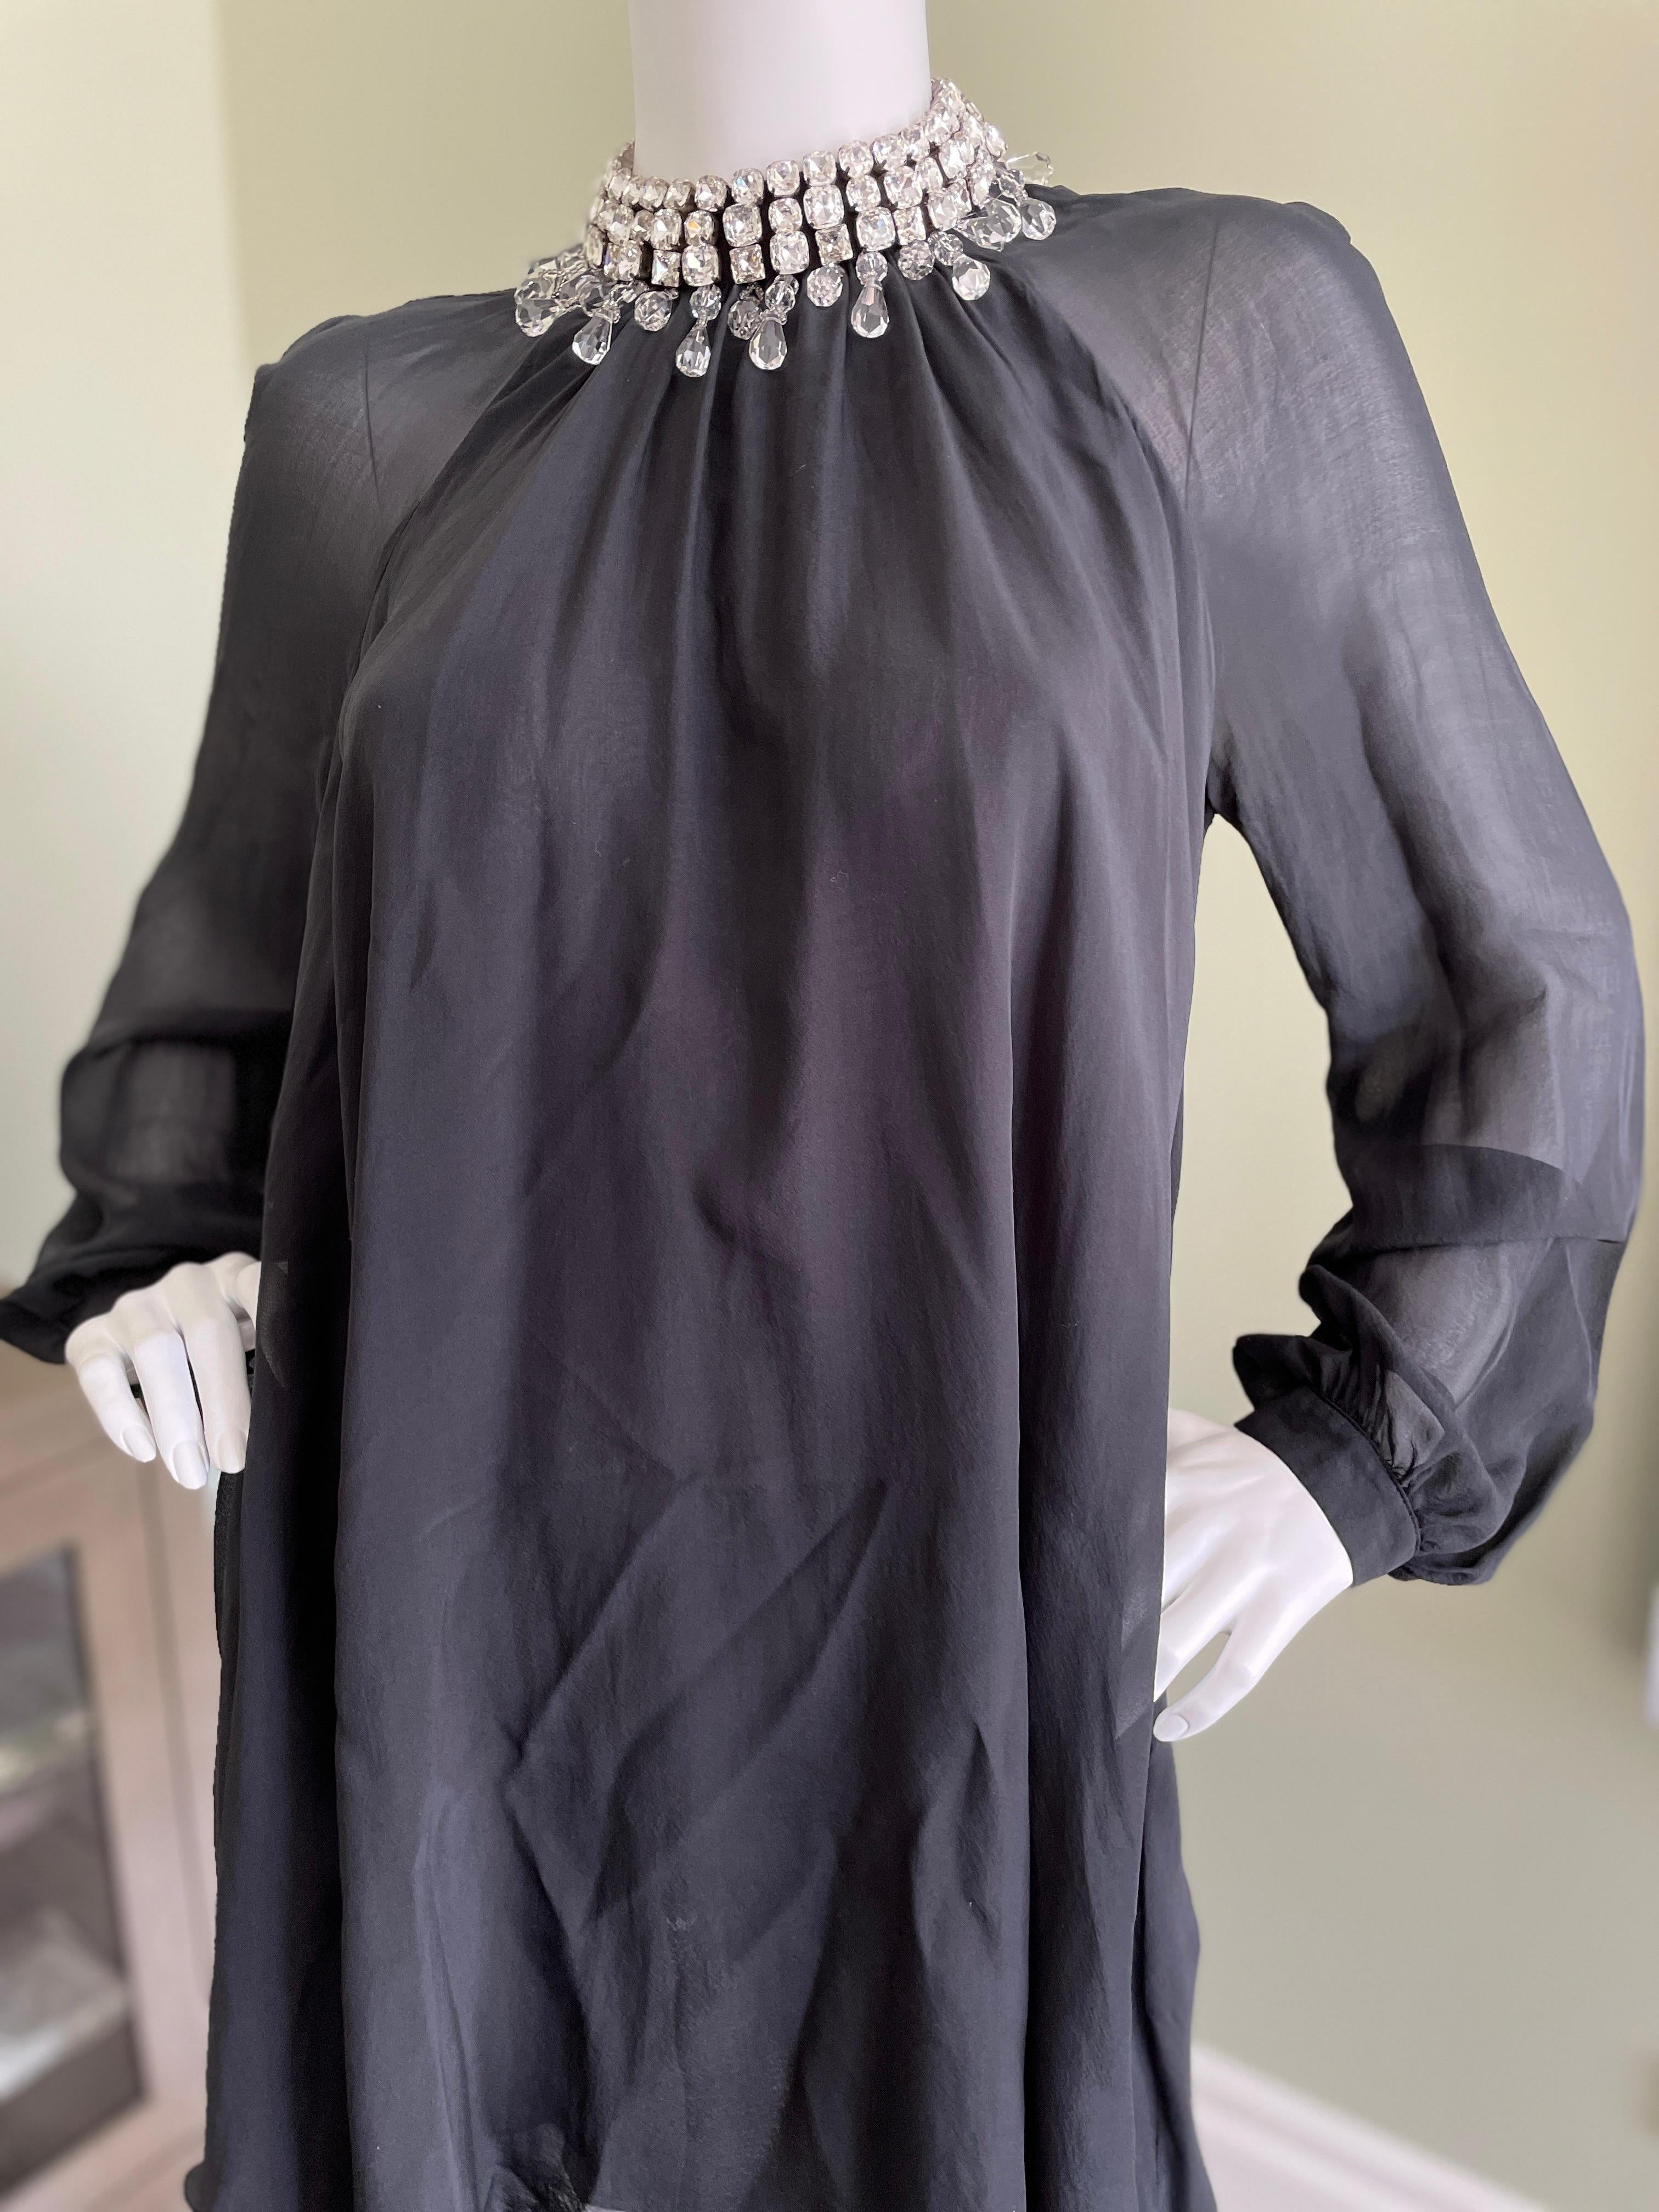  Azzaro Black Vintage Black Silk Cocktail Dress with Swarovski Crystal Necklace In Excellent Condition For Sale In Cloverdale, CA